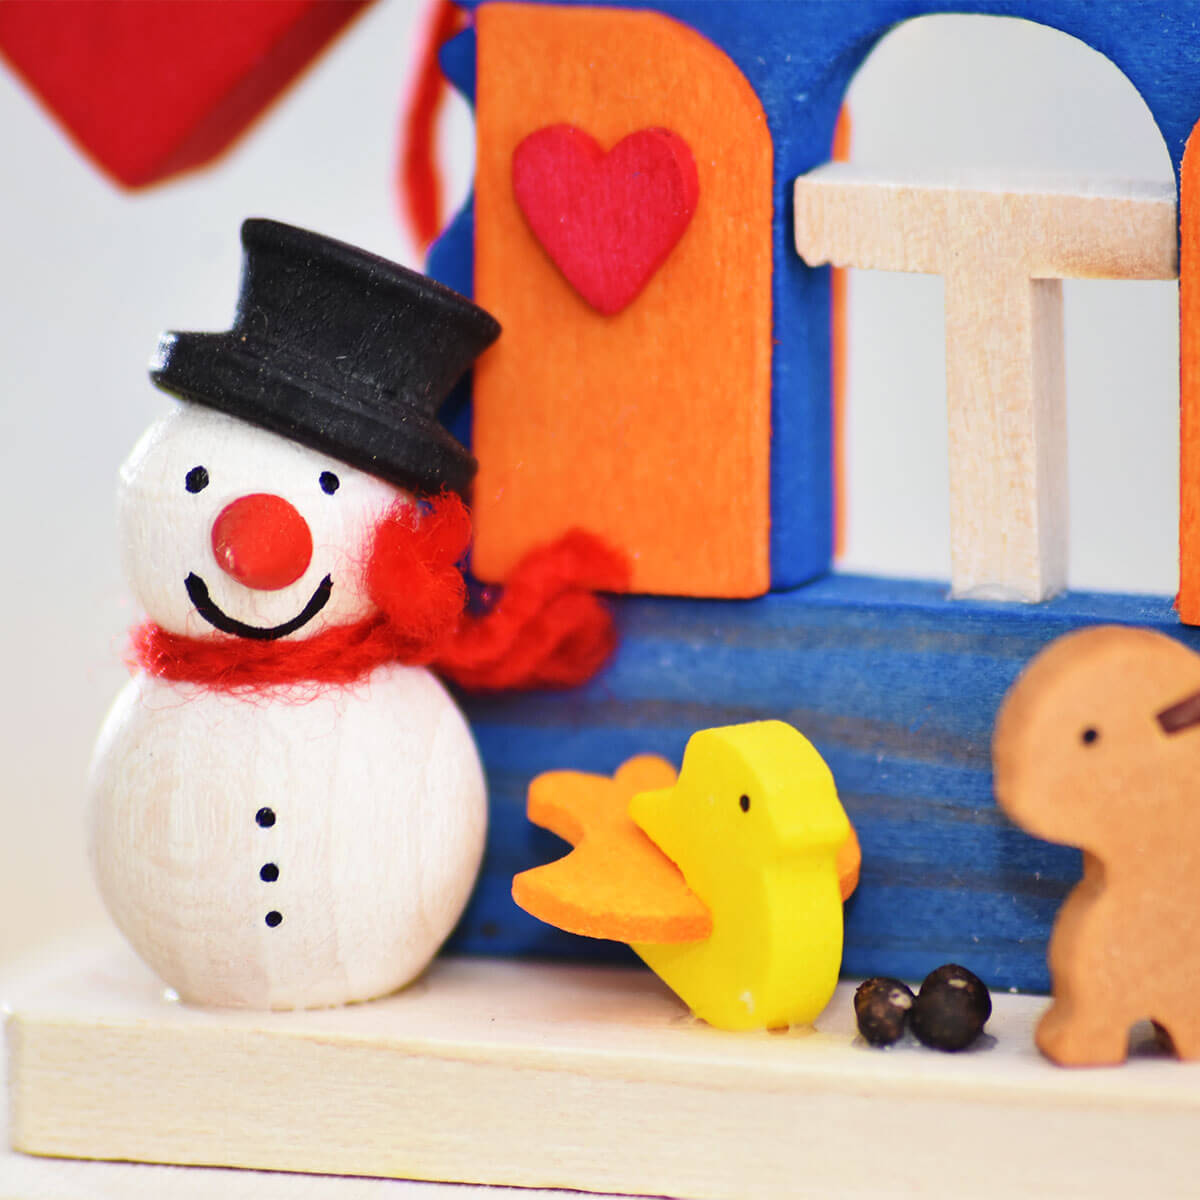 House 'Snowman' Ornament with animals